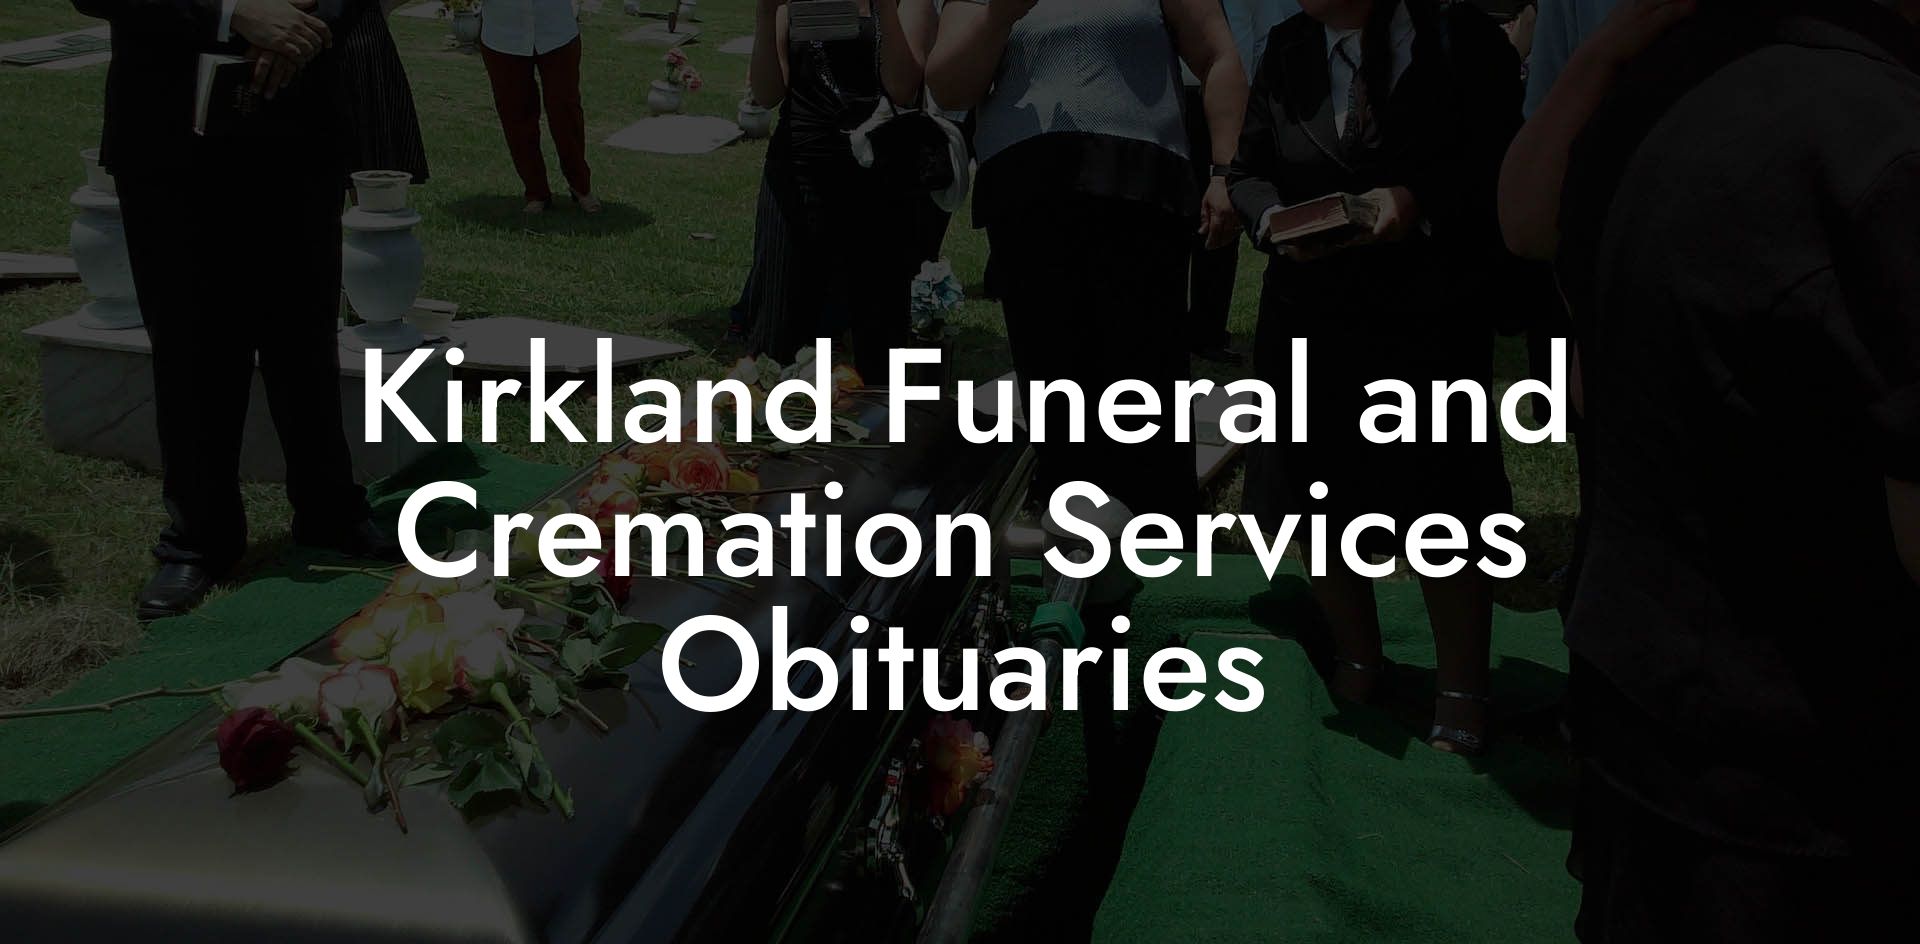 Kirkland Funeral and Cremation Services Obituaries